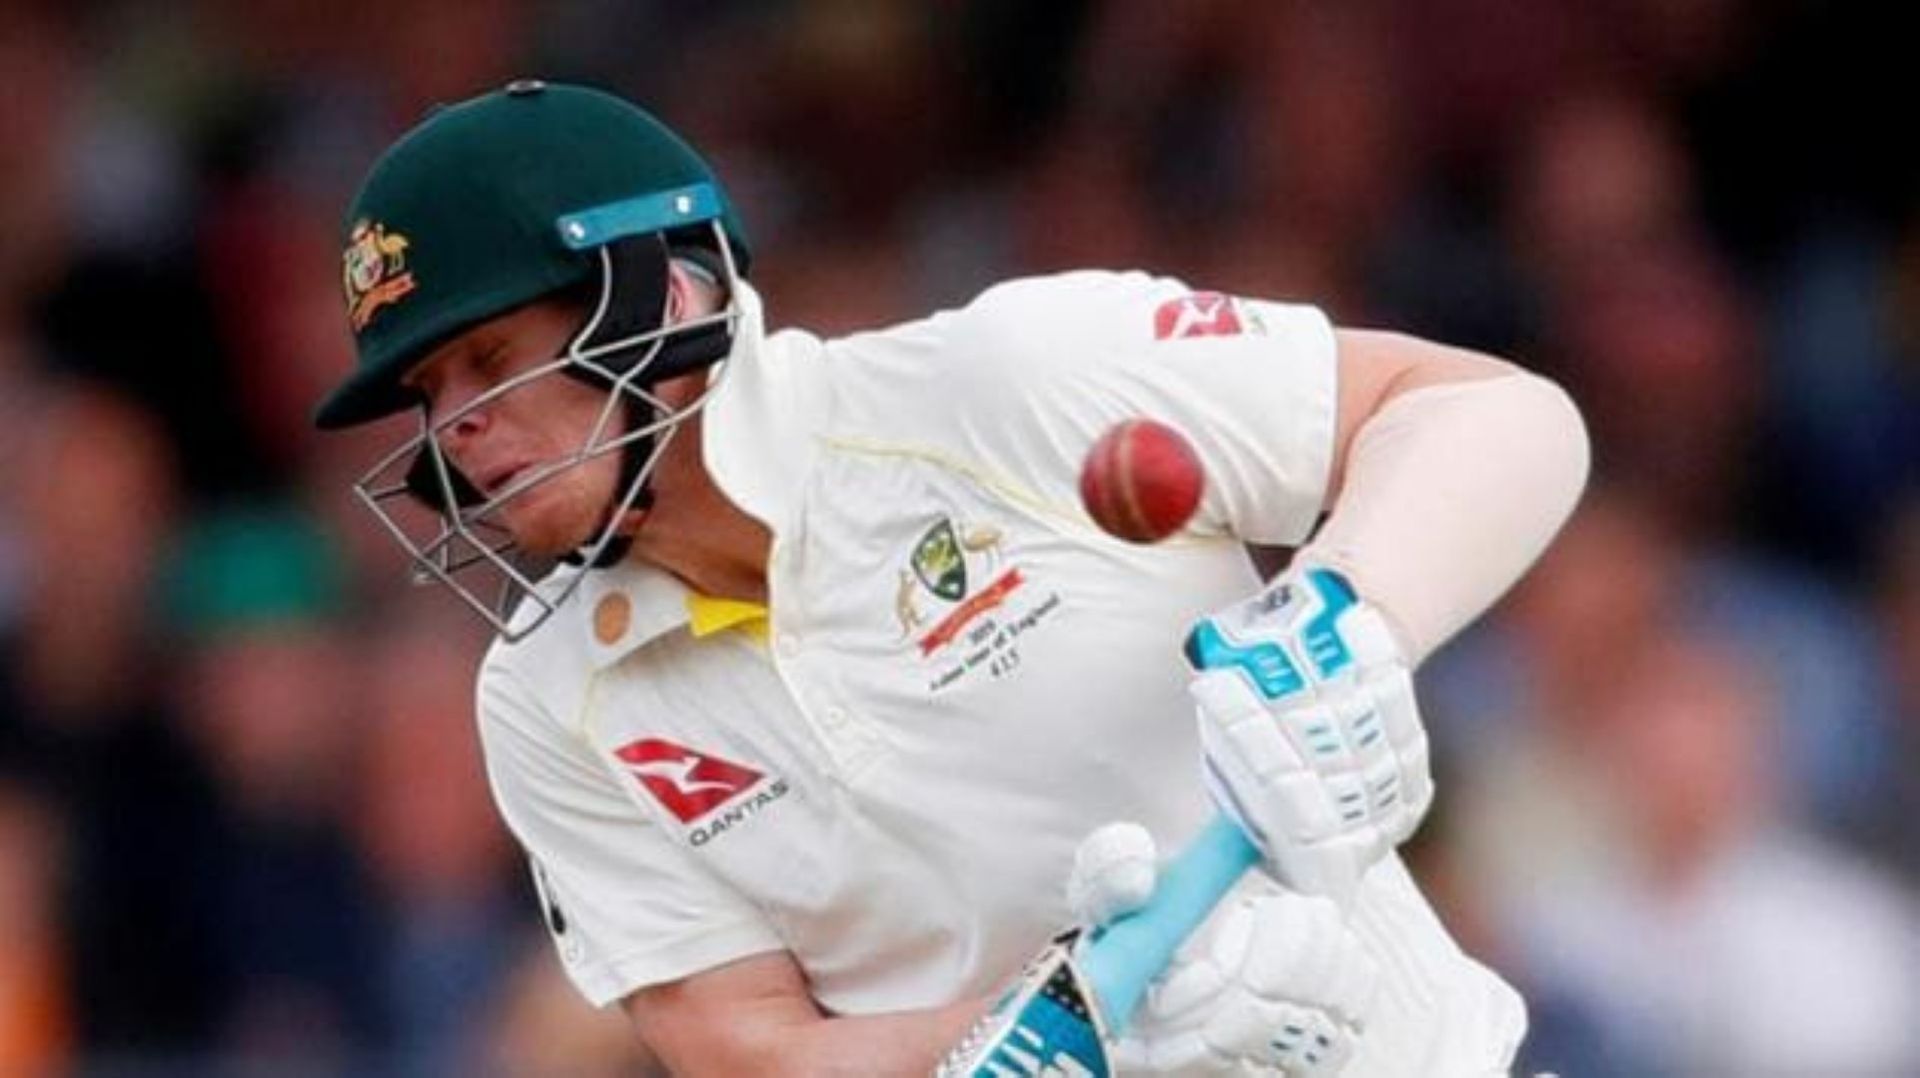 Steve Smith has struggled against express pace at different times in his Test career